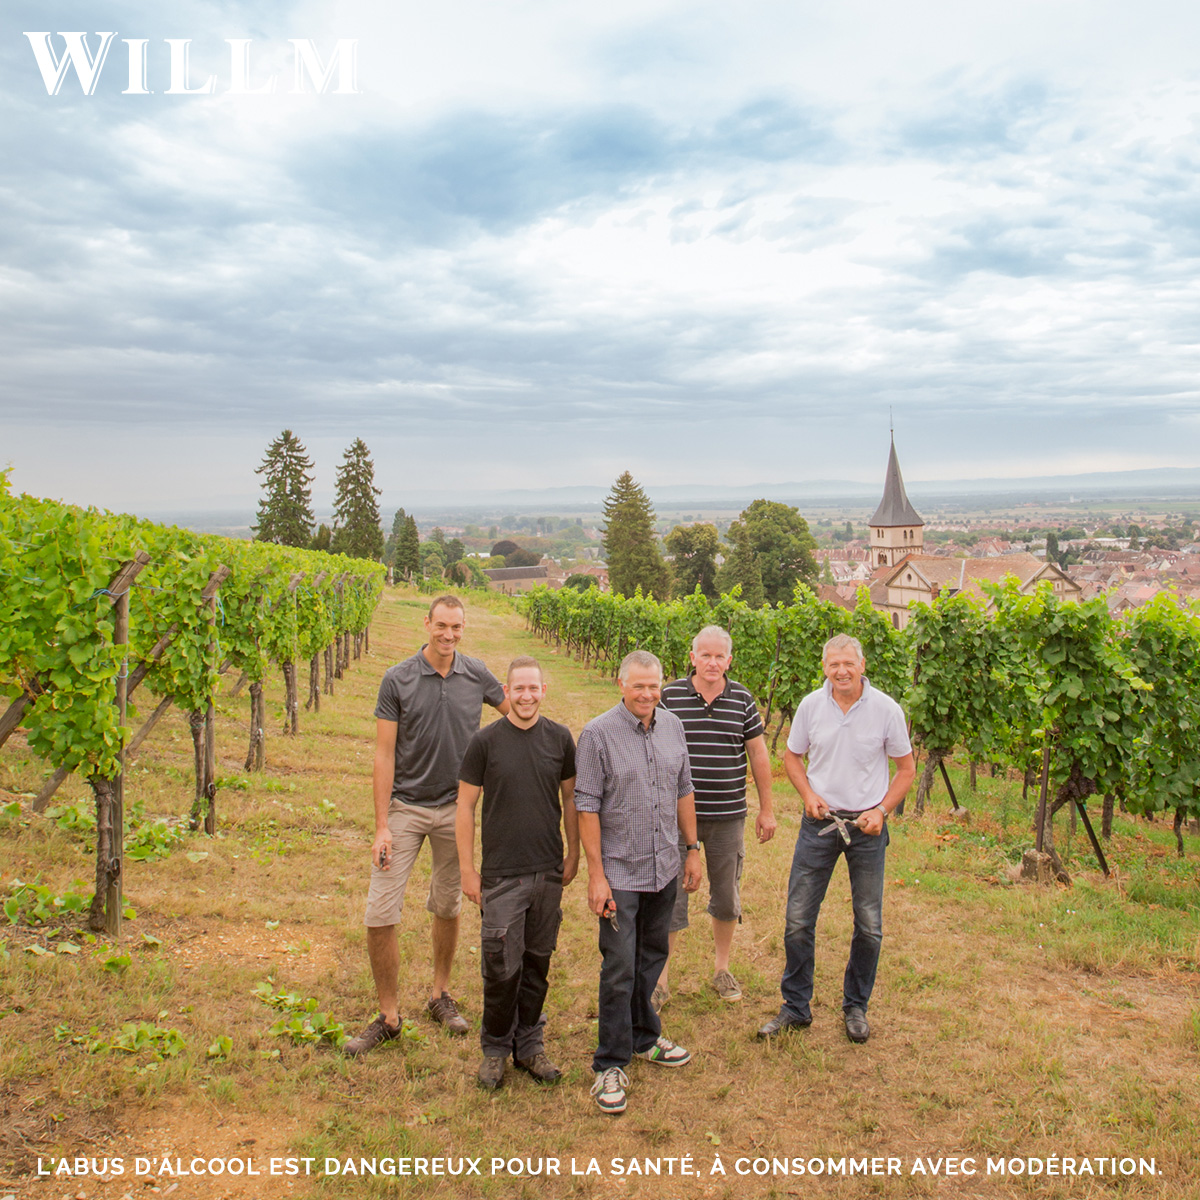 Our Willm winegrowers wish you a very happy new year with the hope that you will have many blessing in the year to come! 😍 #alsacewillm #drinkalsace #alsacerocks #alsace #picoftheday #vineyard #tradition #winelovers #winestagram #winegrower #2021 #bonneannee #happynewyear